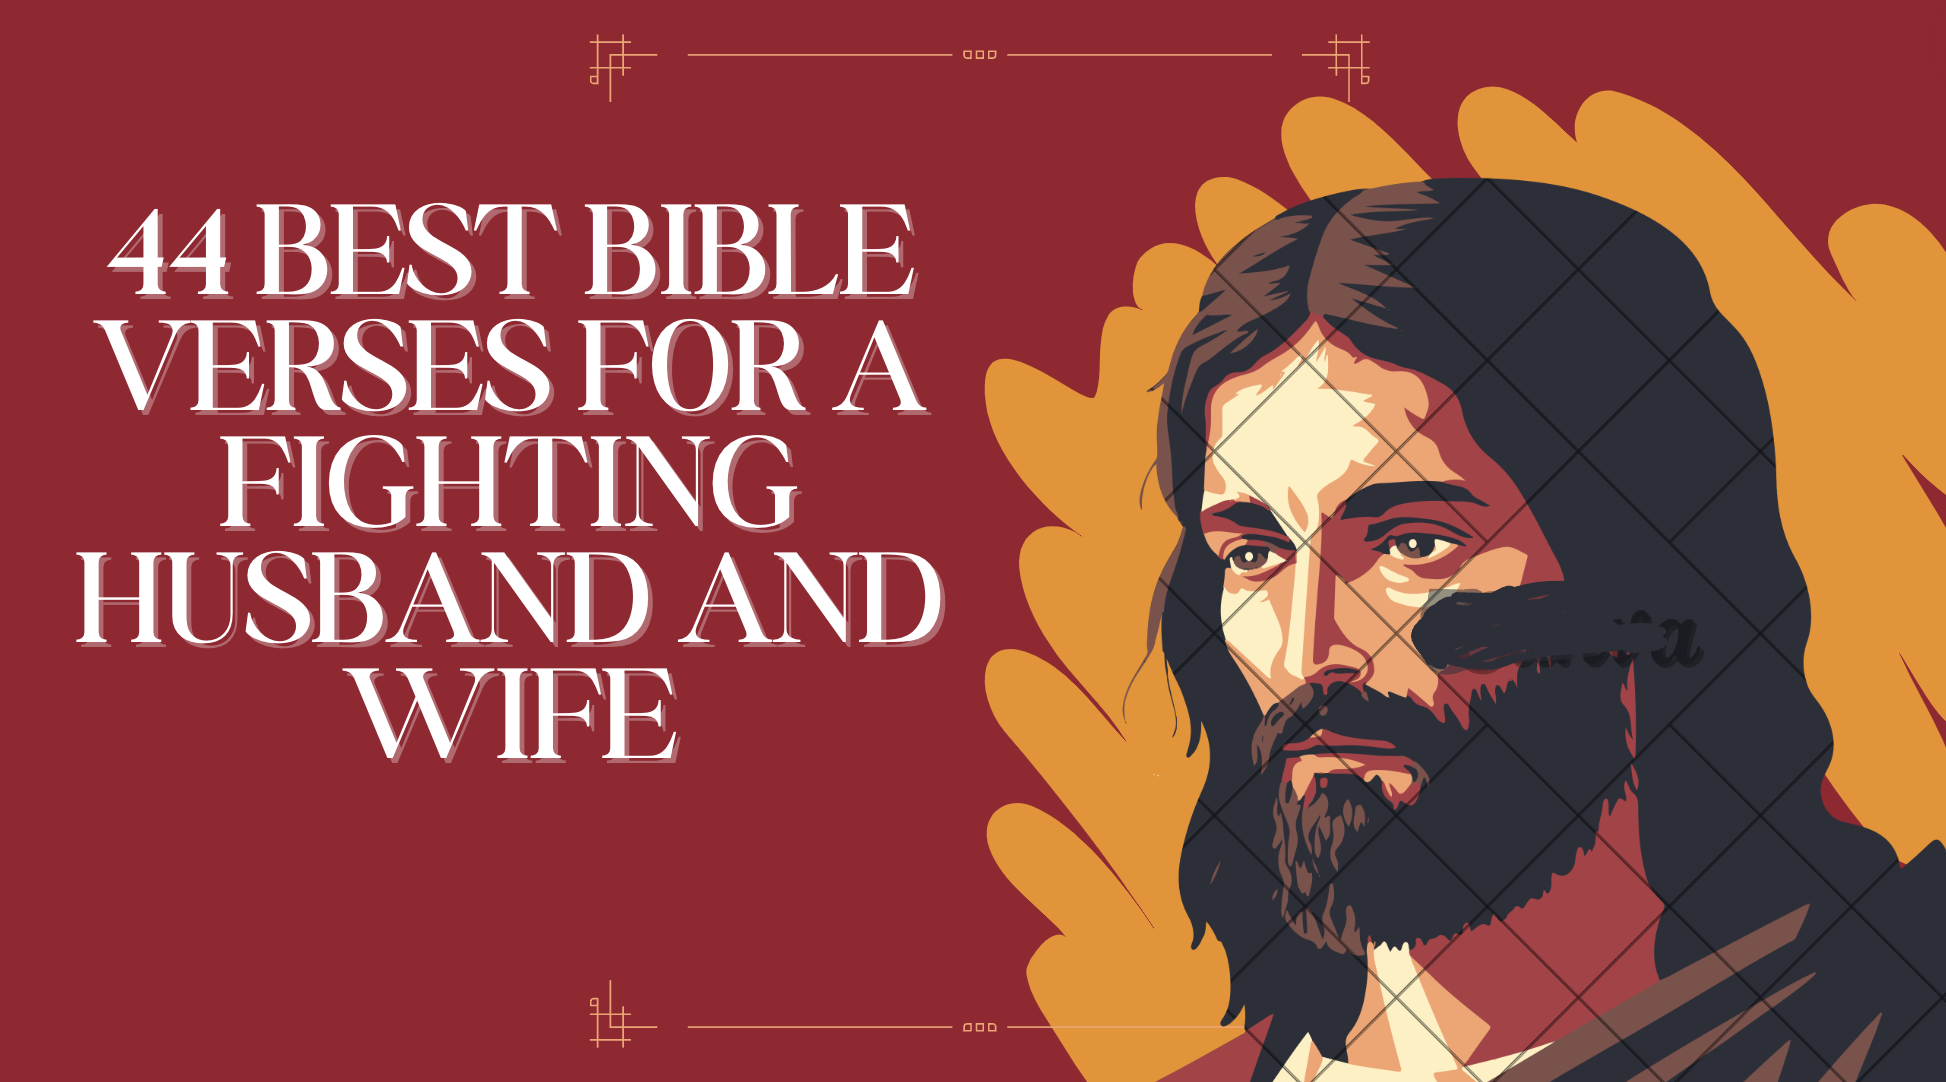 44 Best Bible Verses for a Fighting Husband and Wife